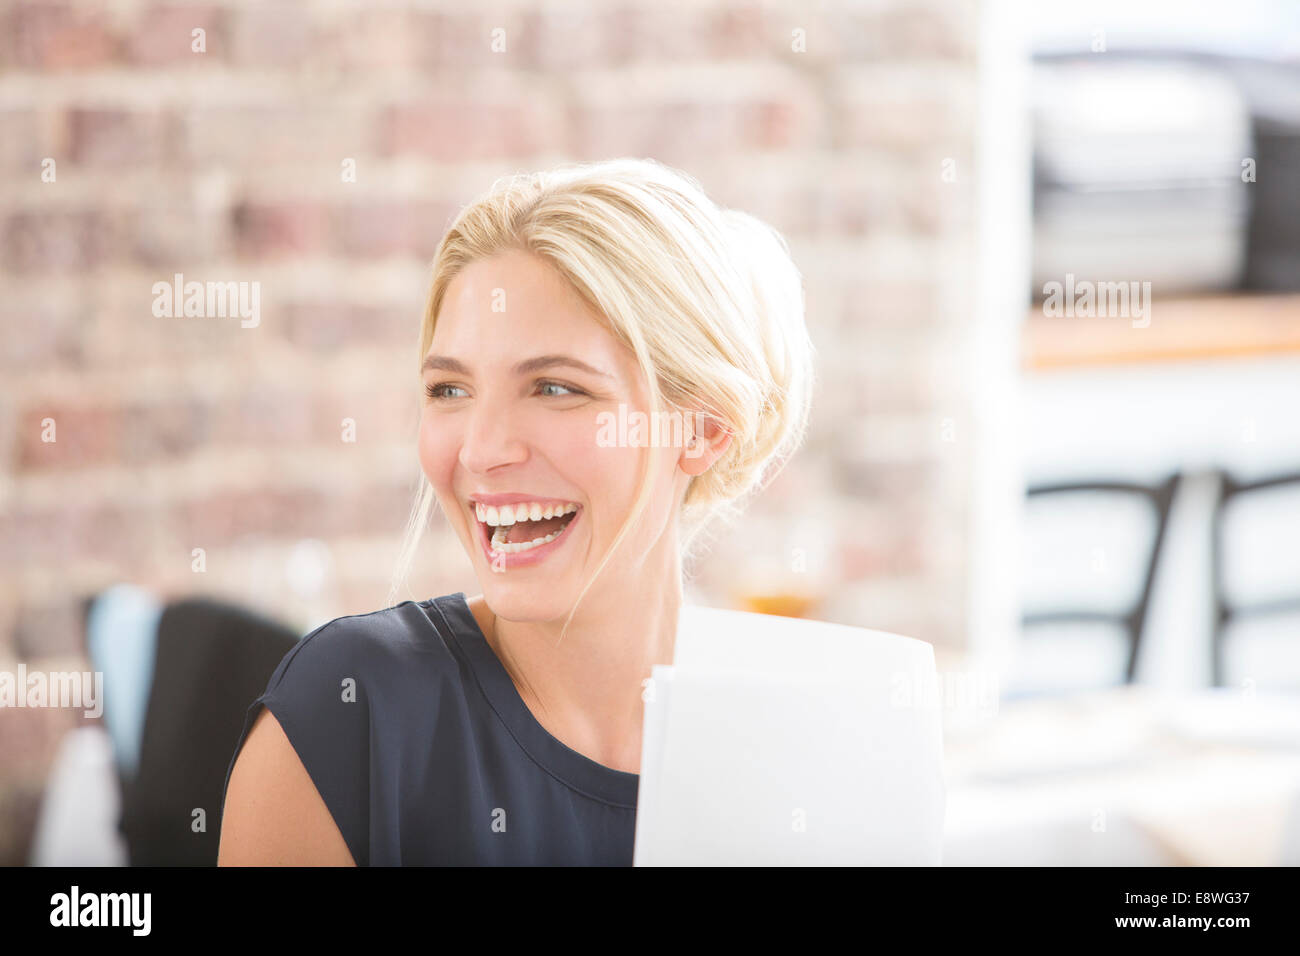 Woman laughing in office Banque D'Images